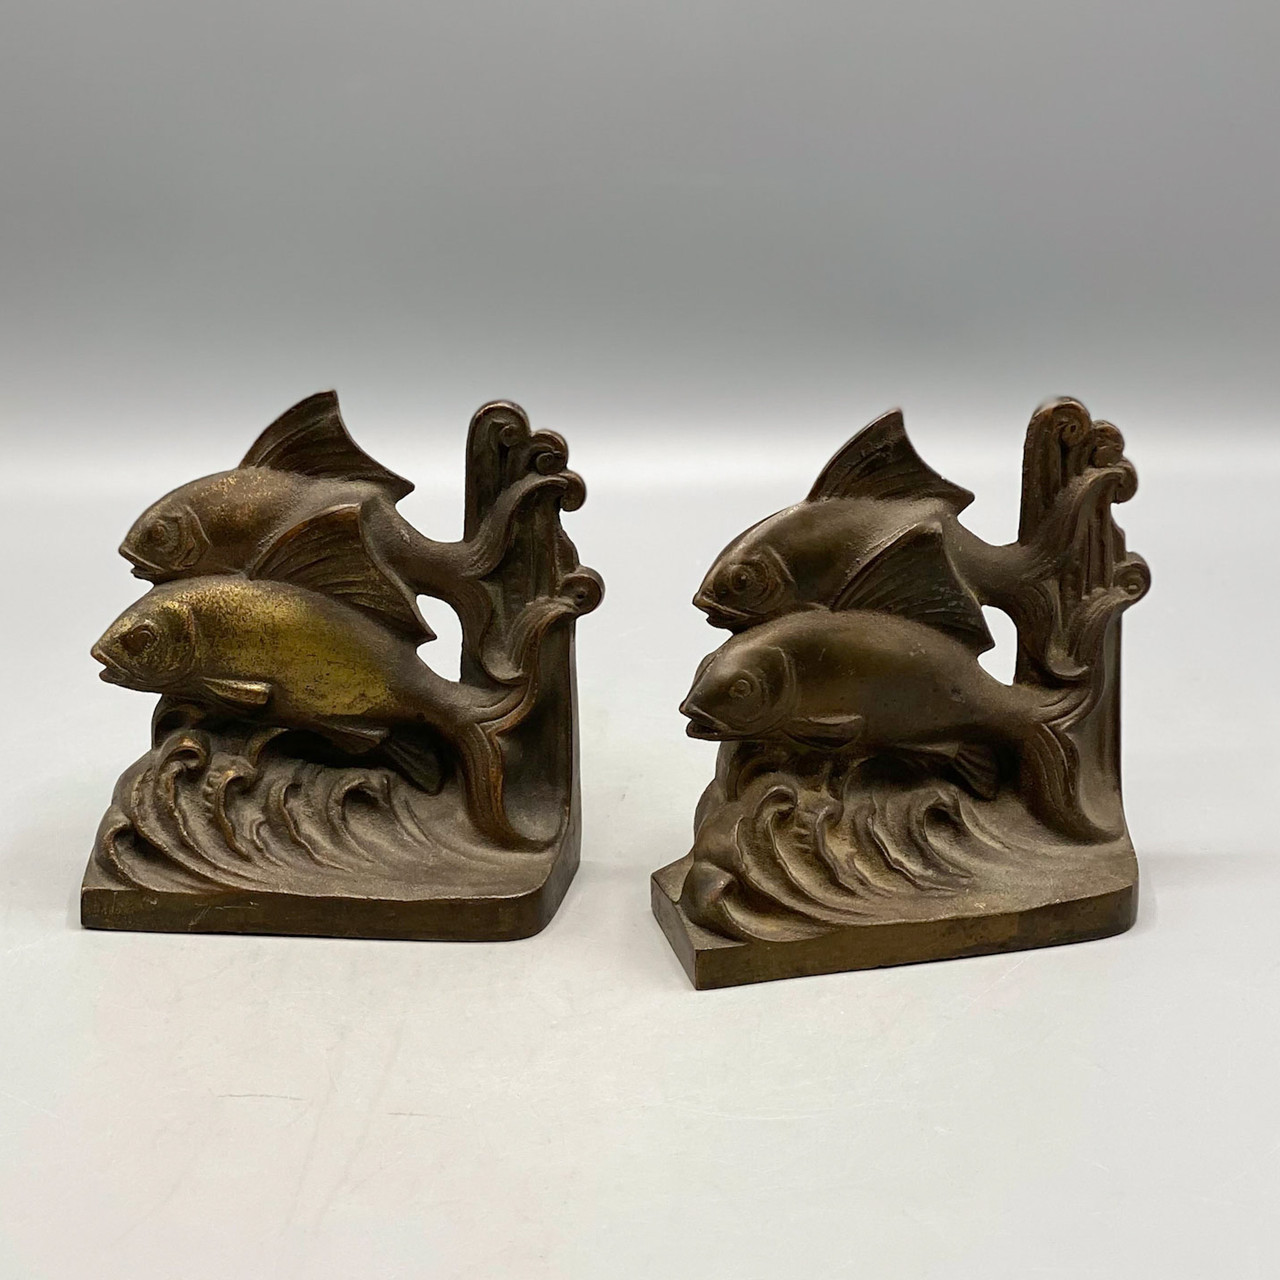 Antique Hubley Fish Bookends